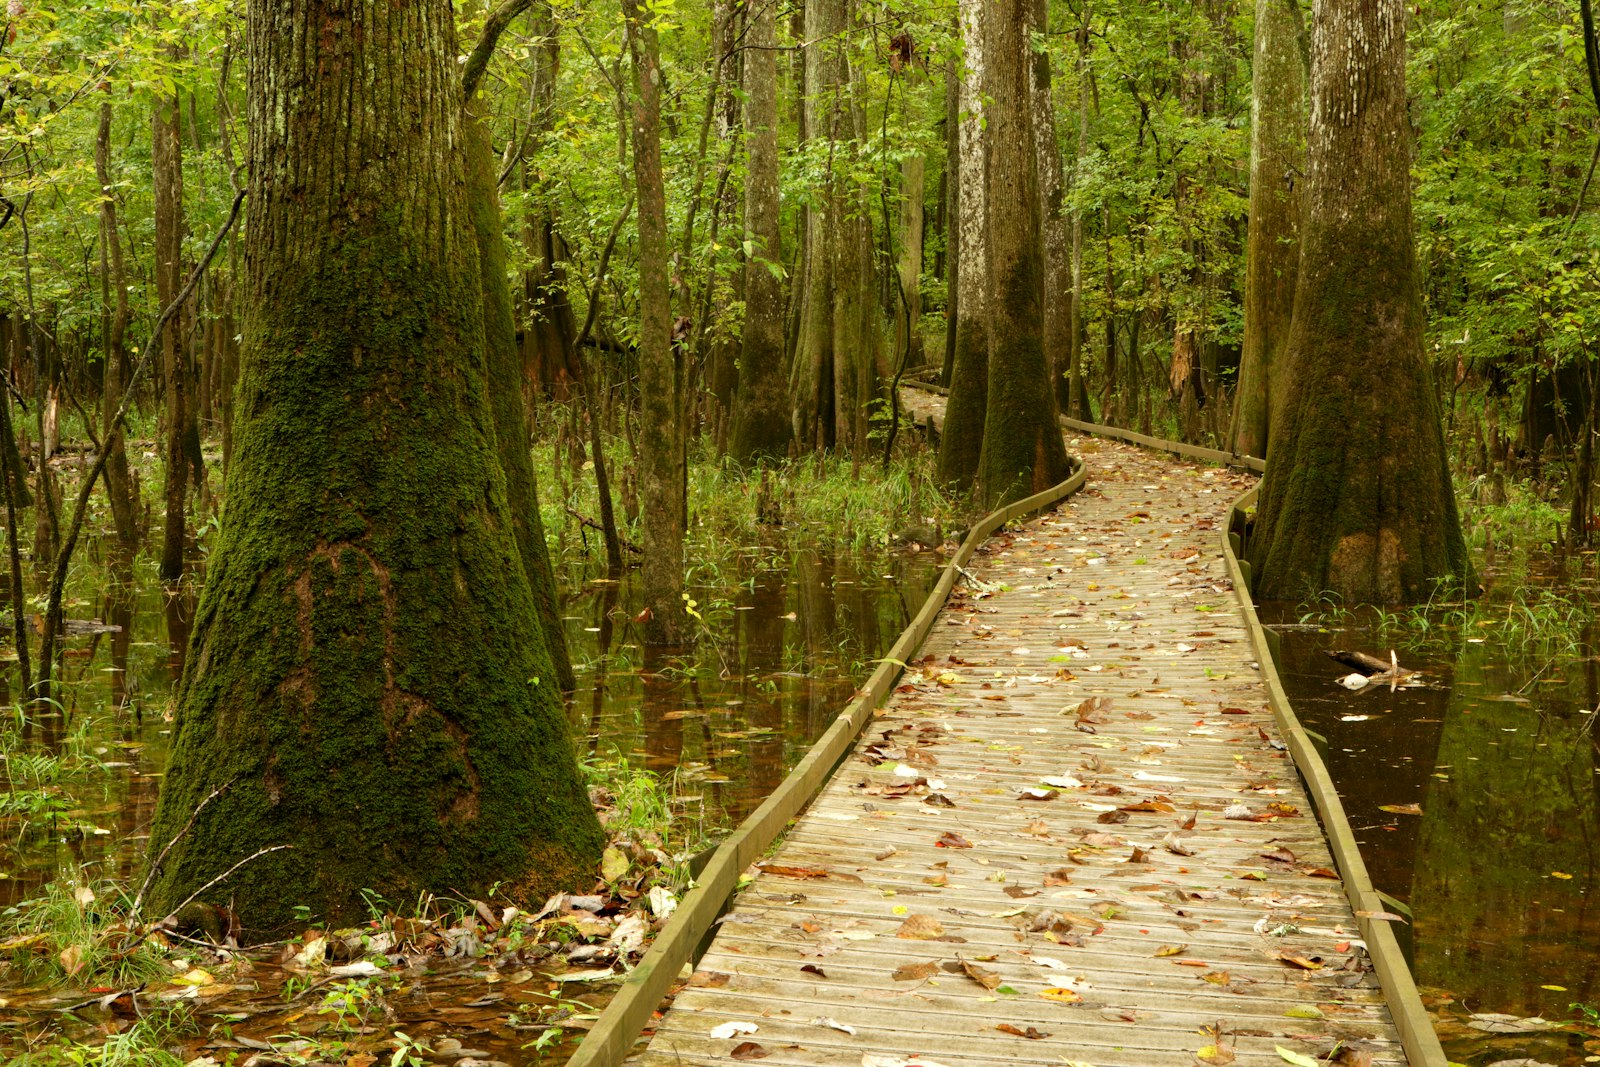 An elevated wooden walkway winds through a cypress grove